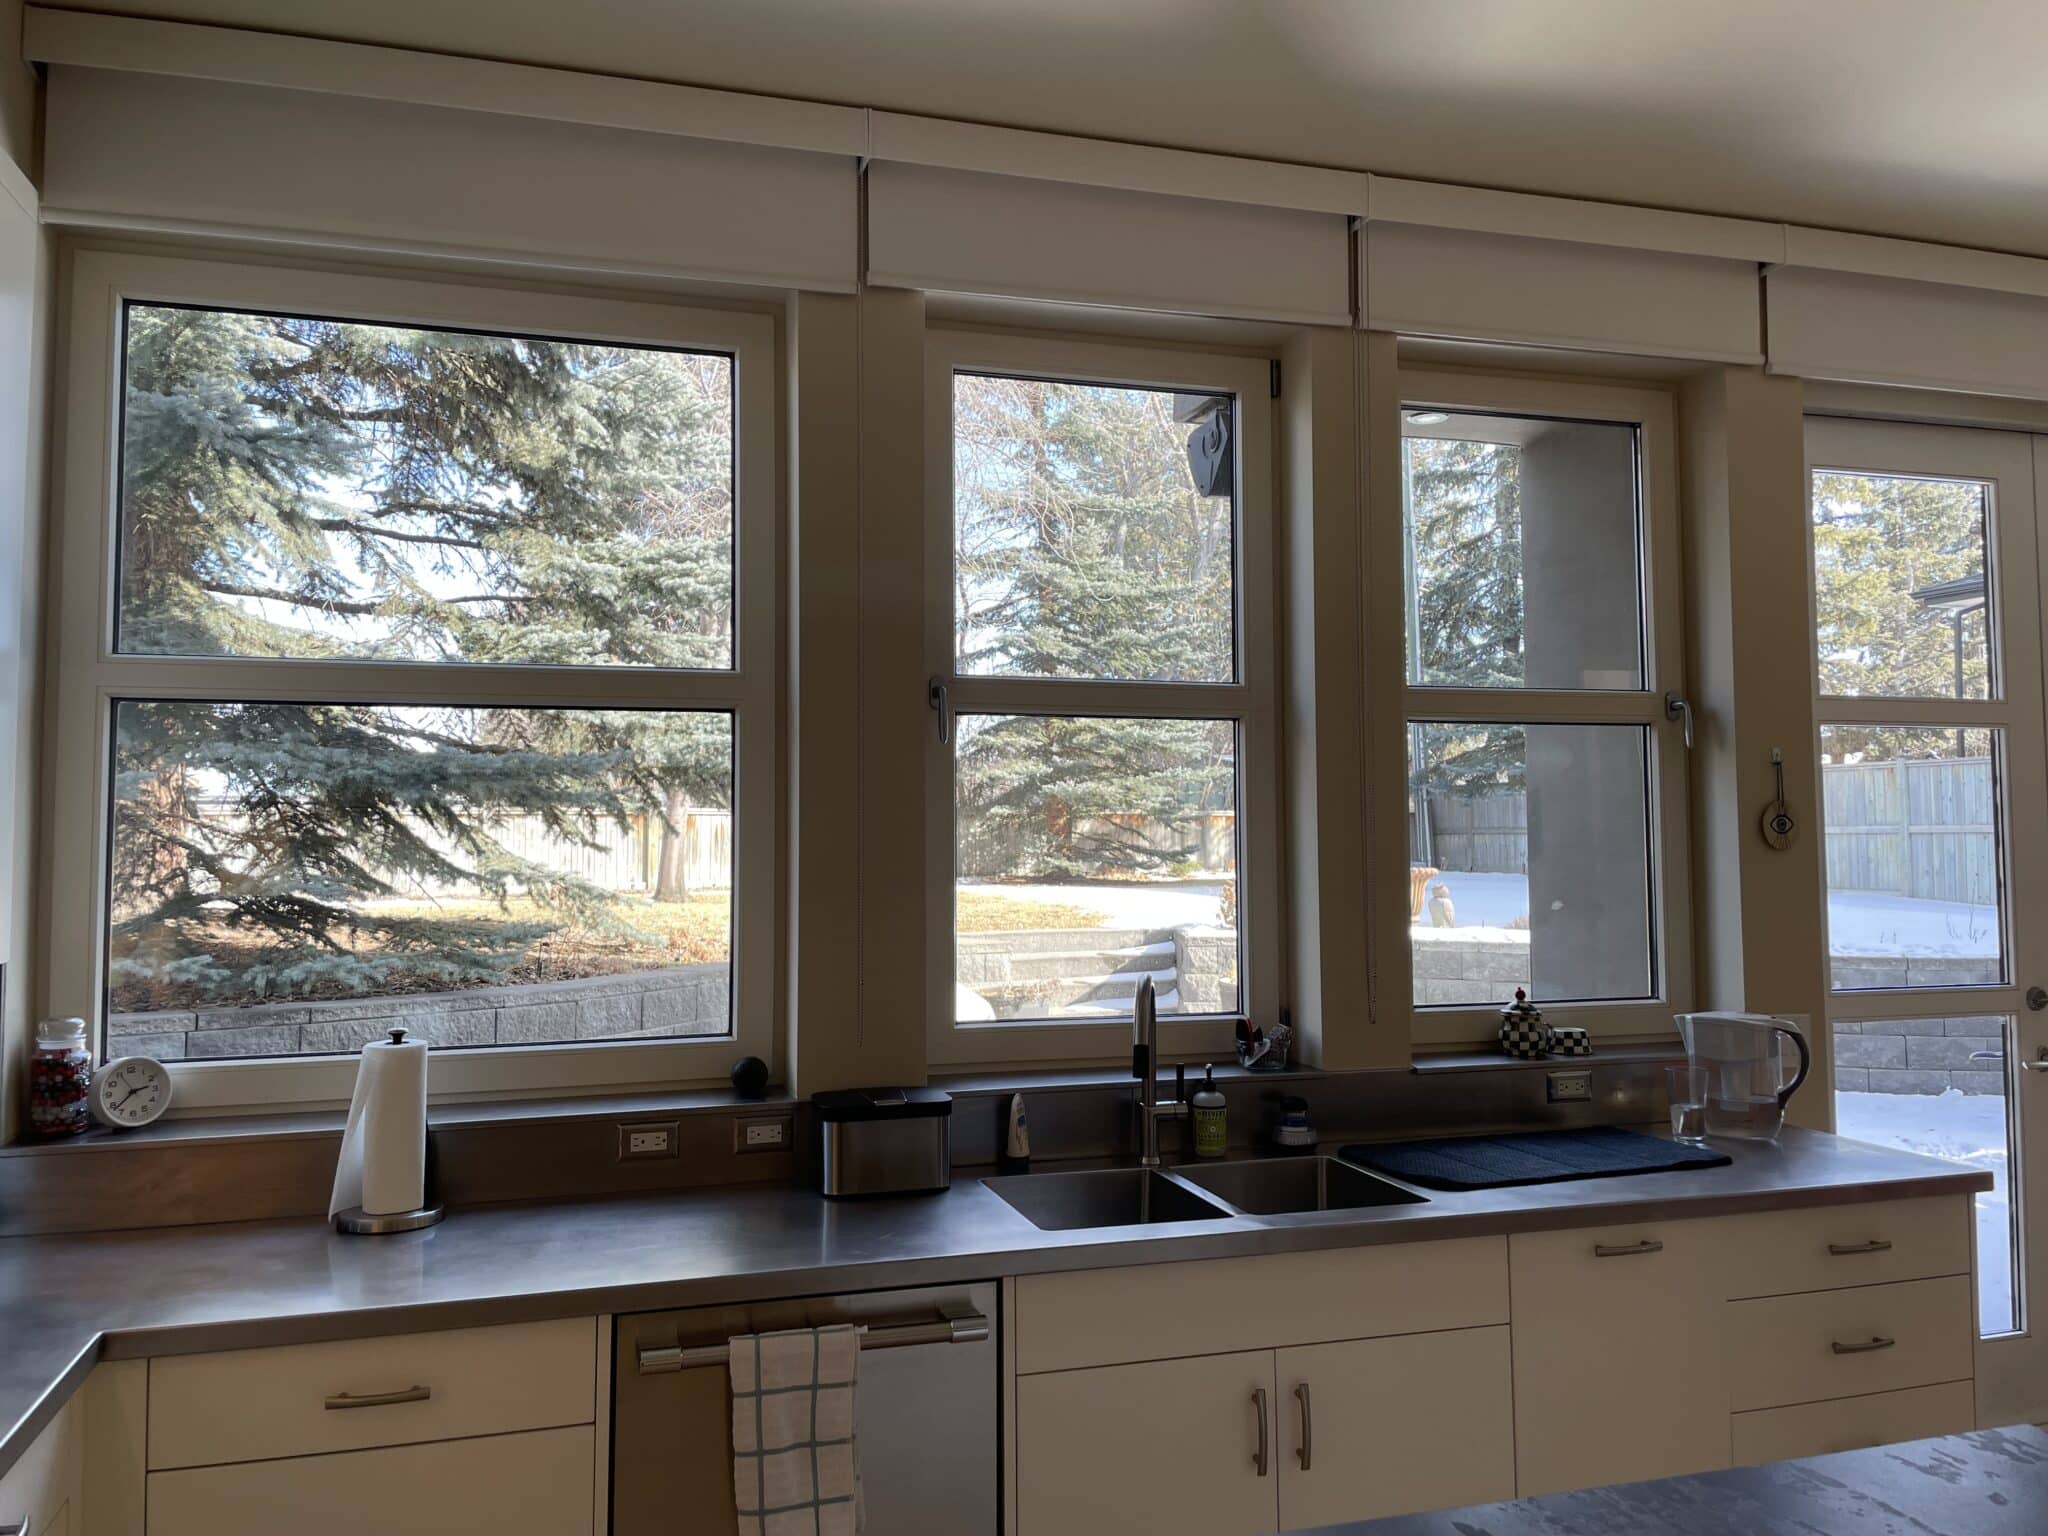 Beautiful kitchen countertop with a window